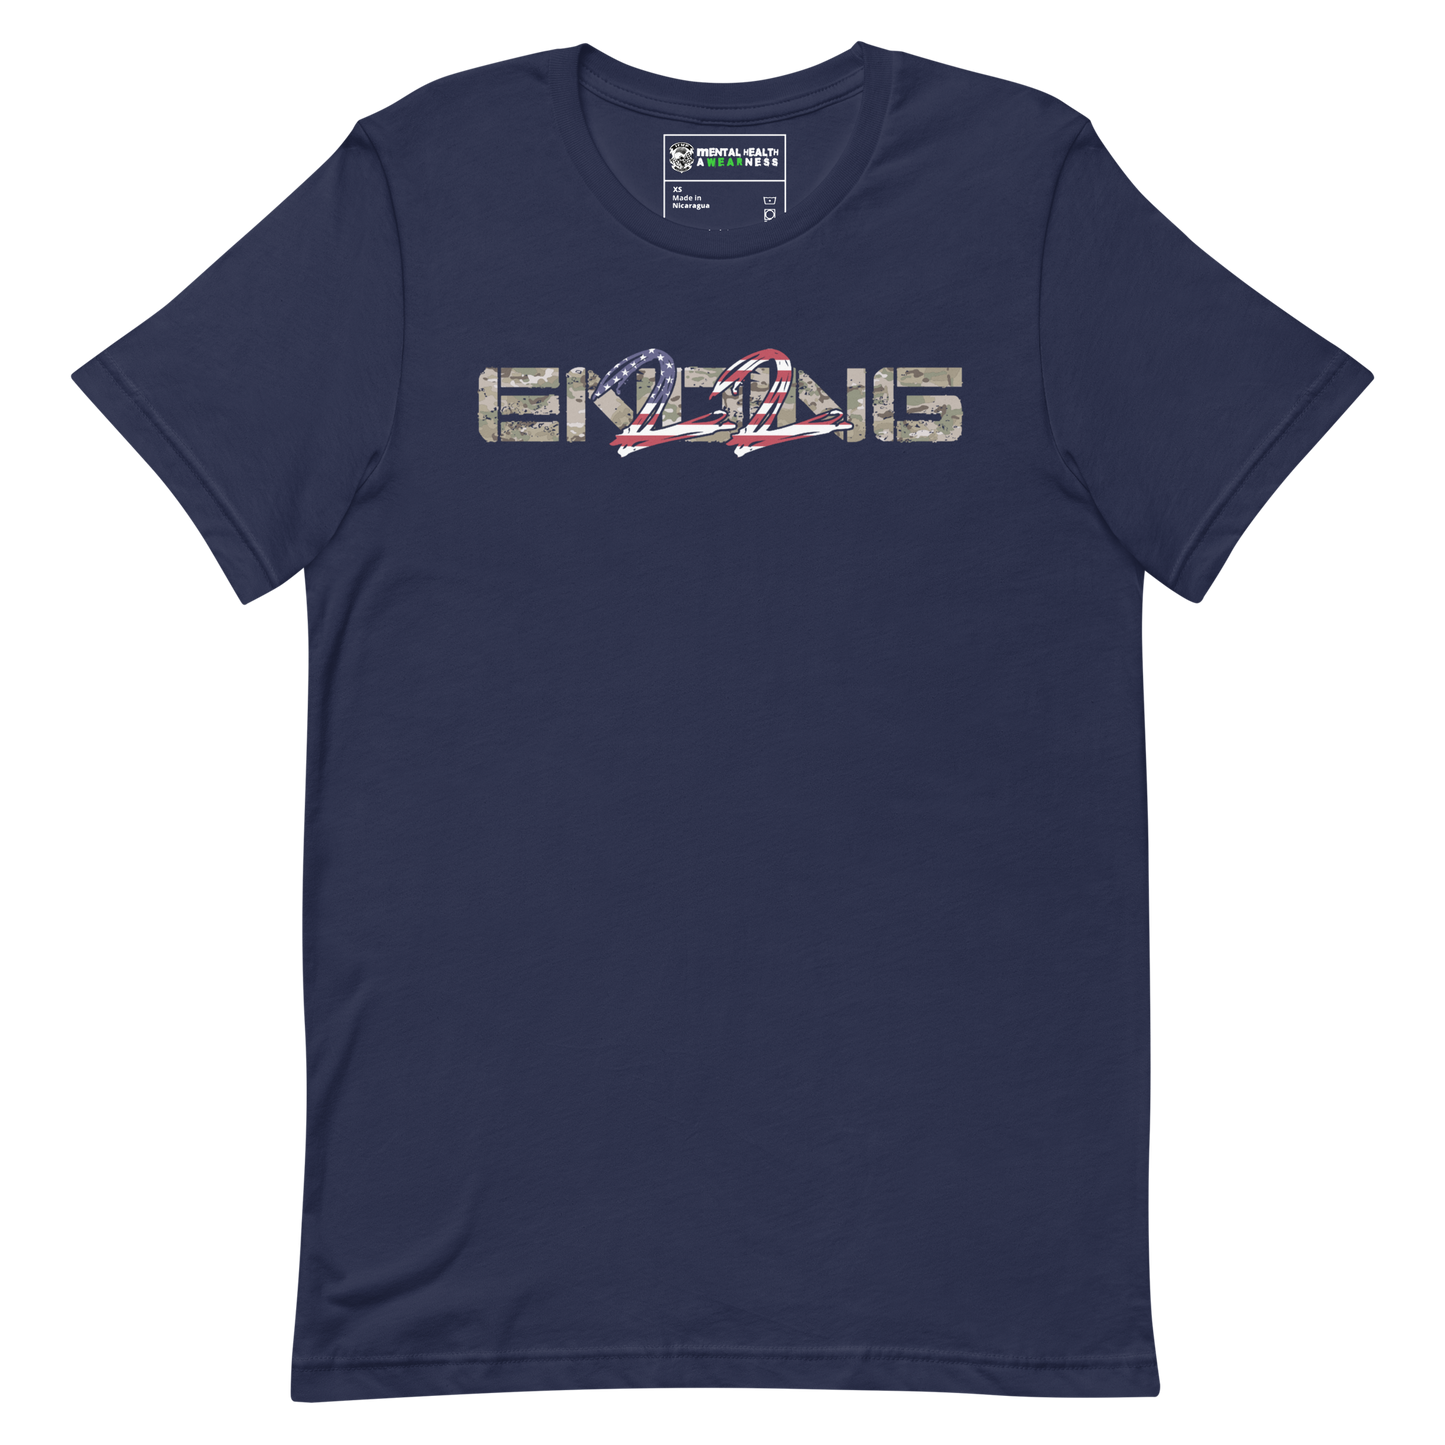 ENDING 22 Army "Grunt" Edition Navy T-Shirt Front